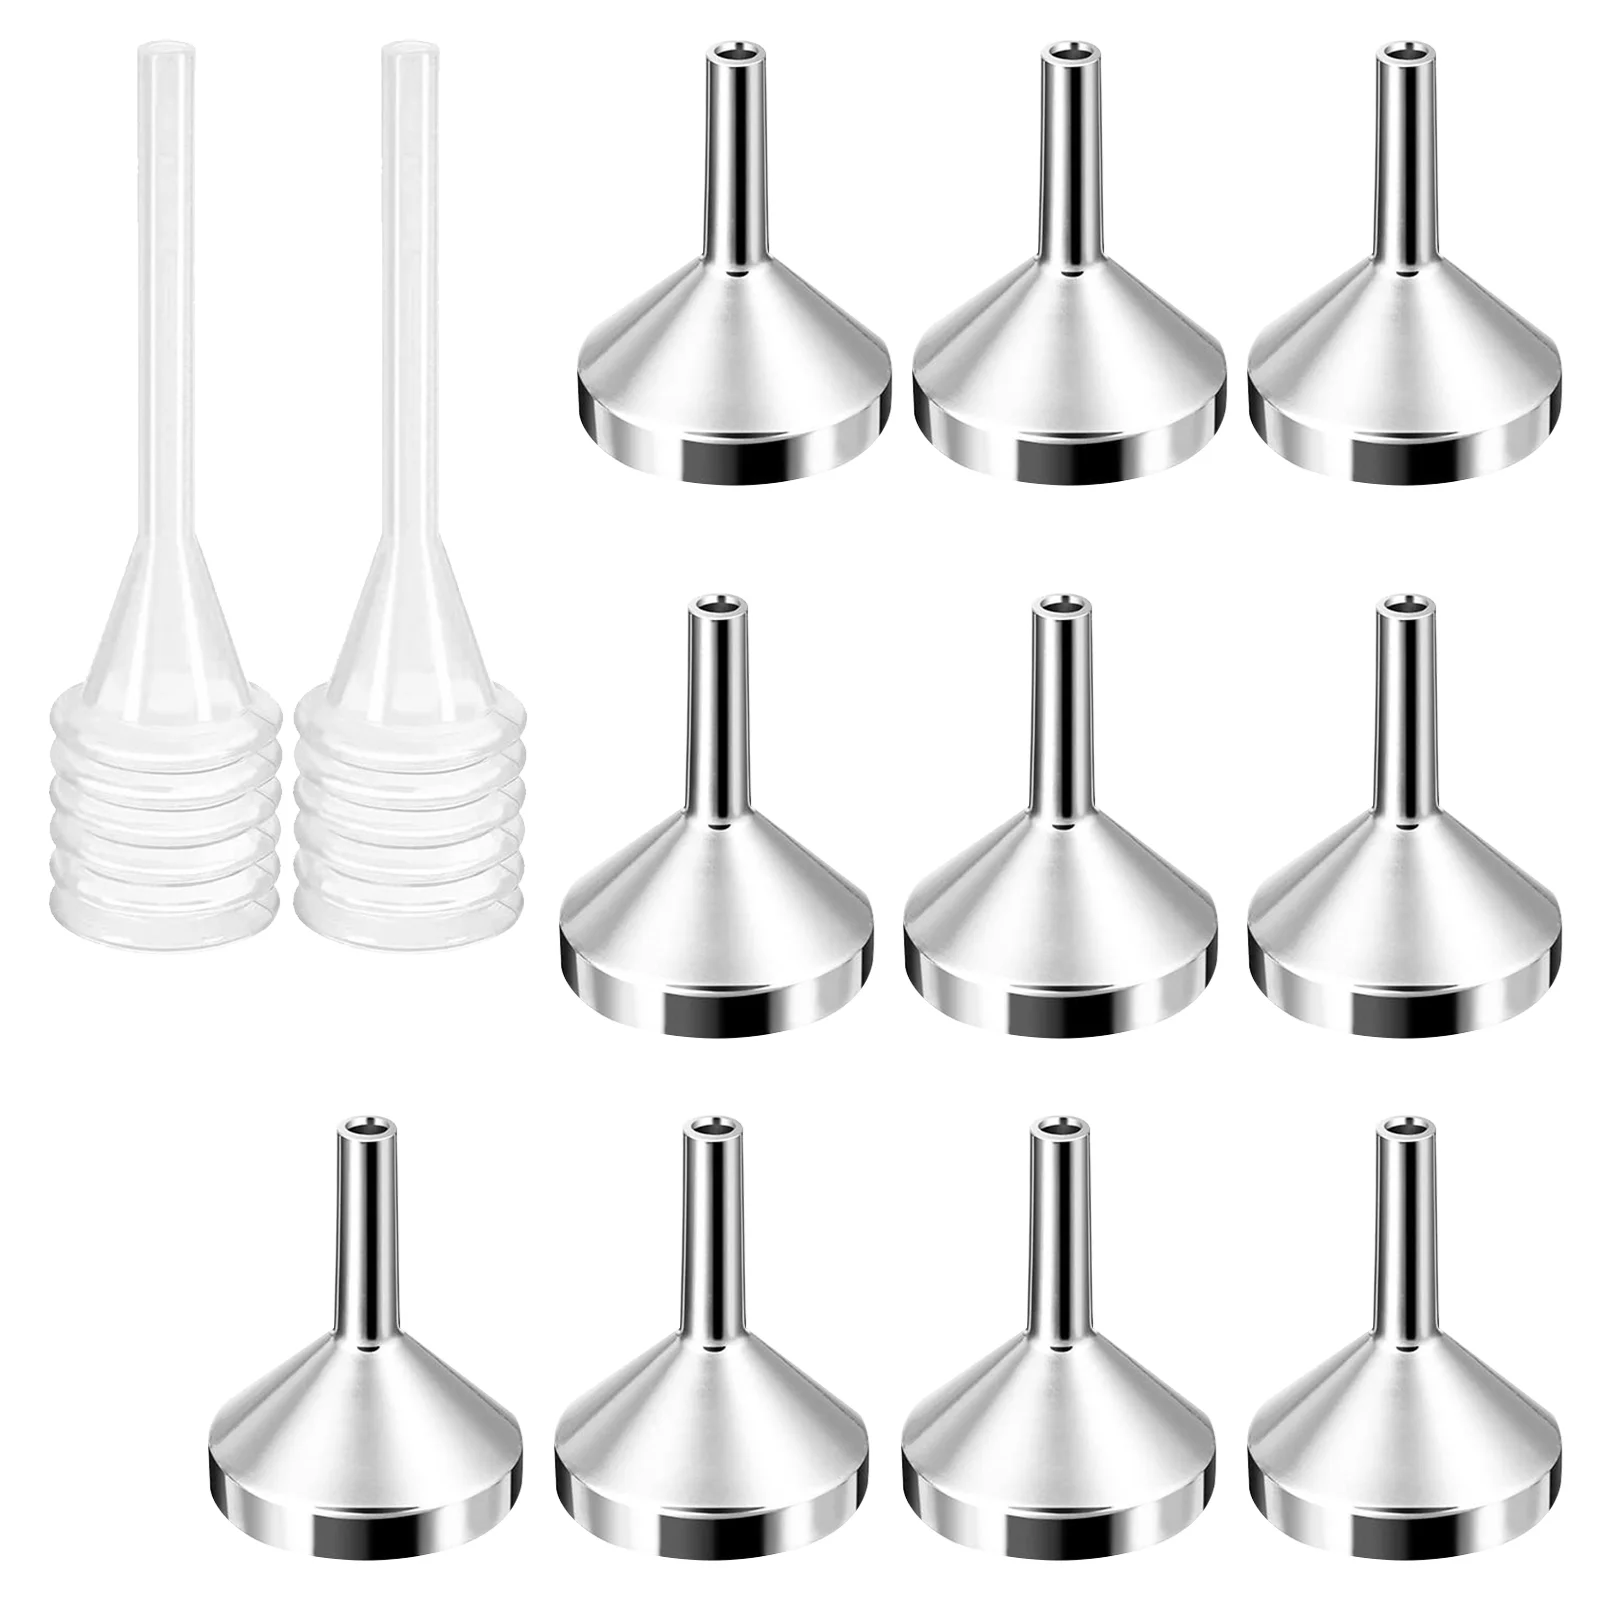 

10 Pcs Essential Oil Dropper Mini Funnels Small Filling Bottles Stainless Steel Straw Science Laboratory Accessories Perfume